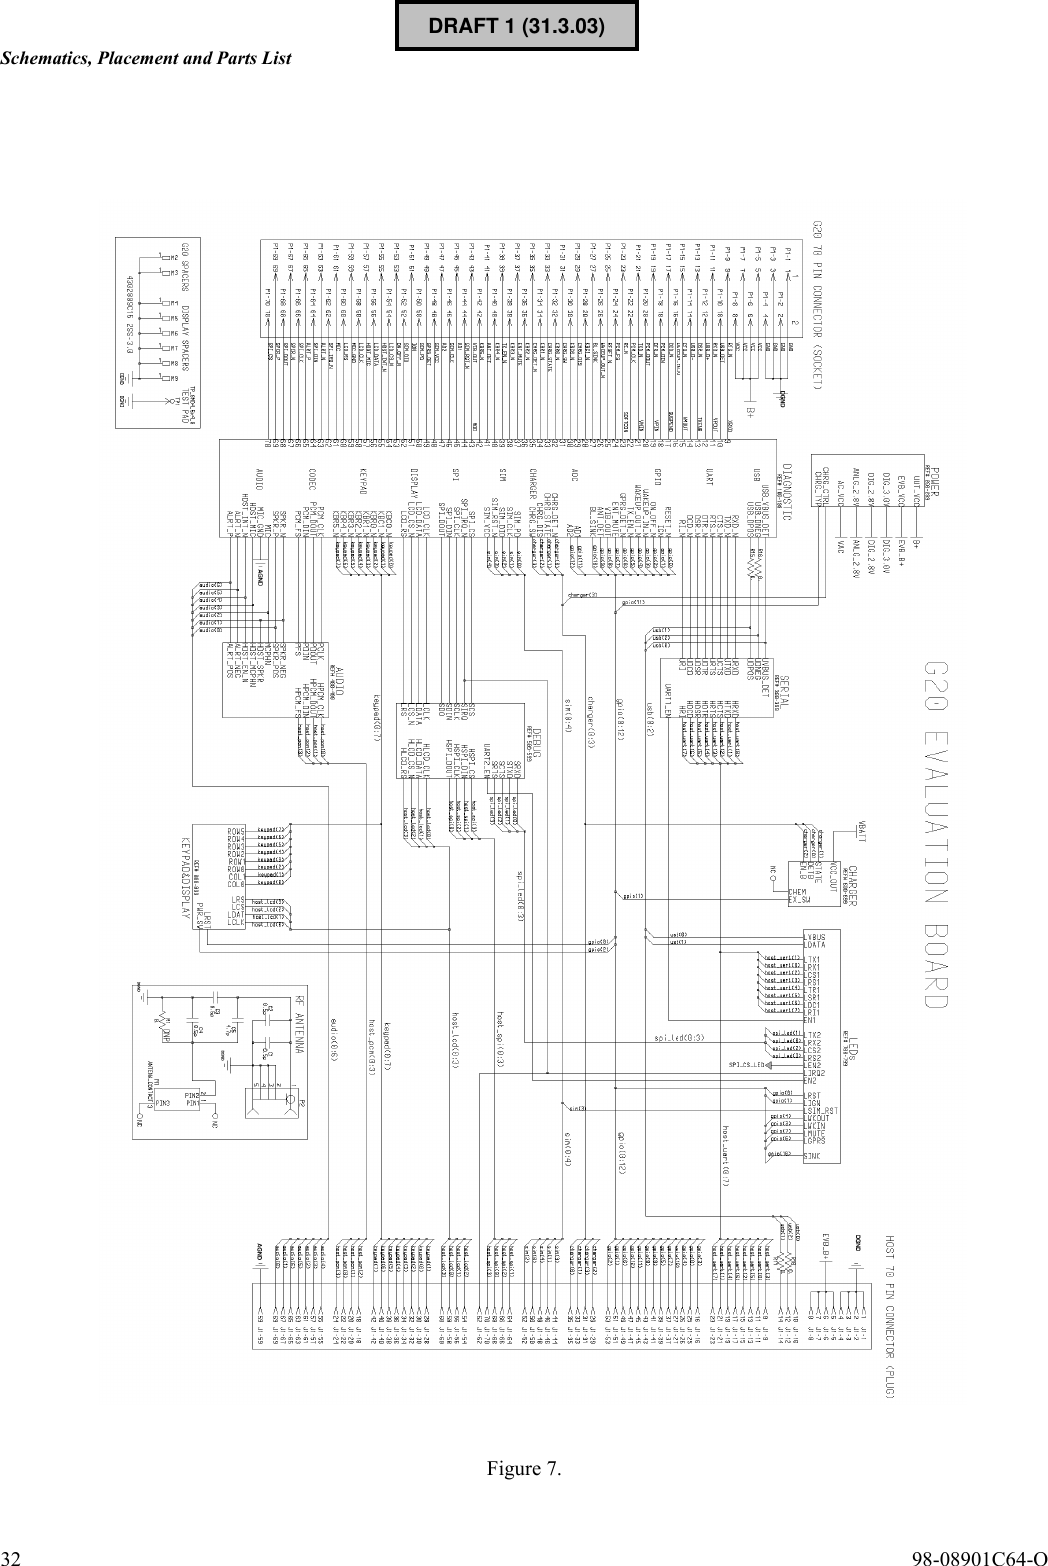 Schematics, Placement and Parts List32  98-08901C64-OFigure 7.DRAFT 1 (31.3.03)